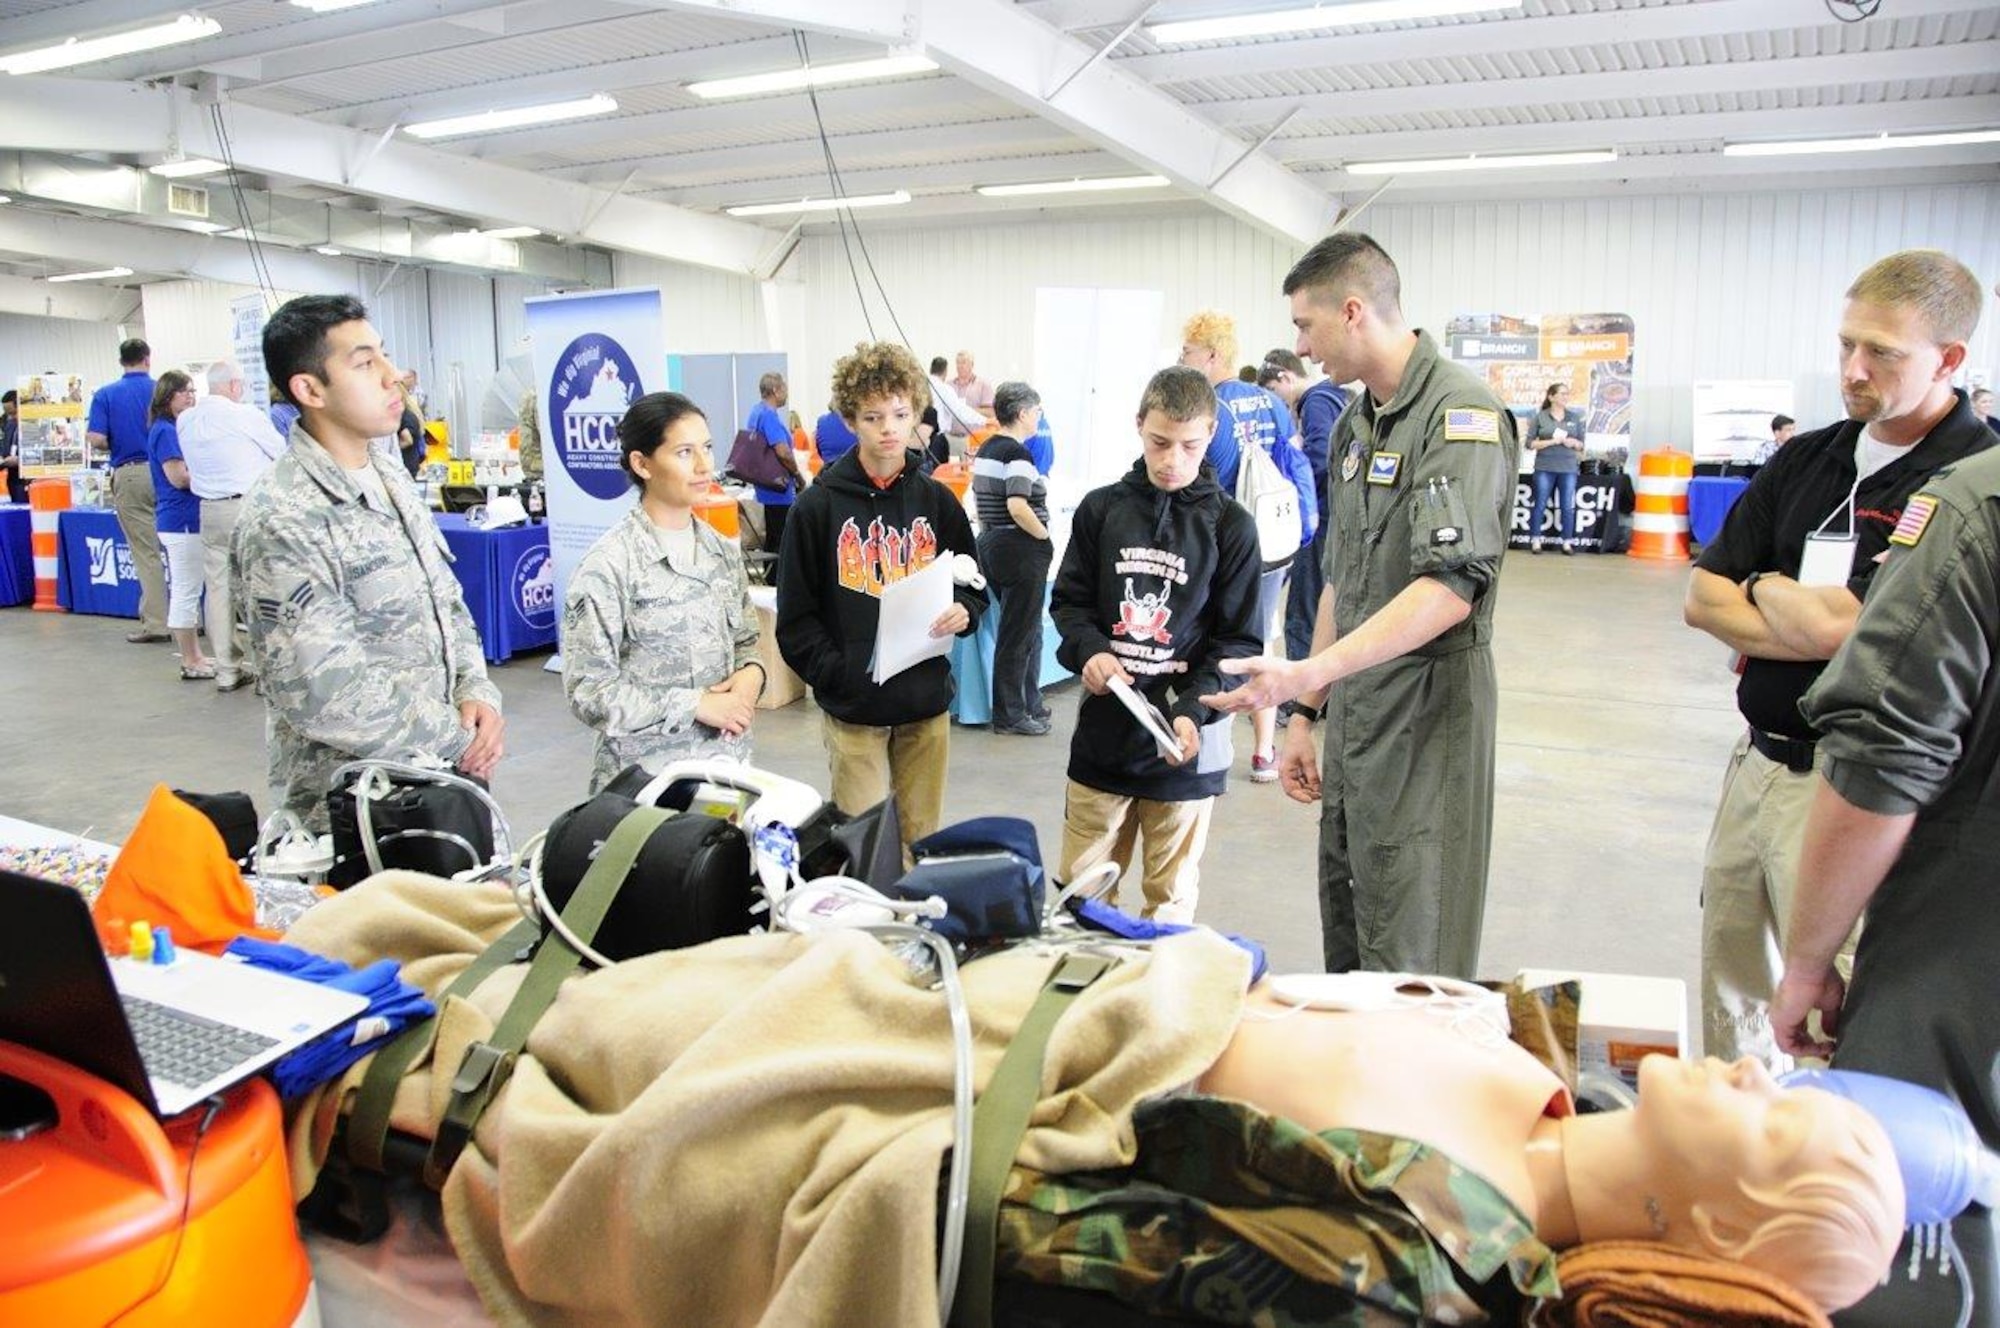 Flight nurses and medical technicians of the 459th Aeromedical Evacuation Squadron talk to students about their careers at the 14th Annual Northern Virginia Transportation Career Fair for High School Students in Manassas, Va. The career fair is part of a Federal Highway Administration initiative to promote the transportation industry and the careers it offers to America’s youth.